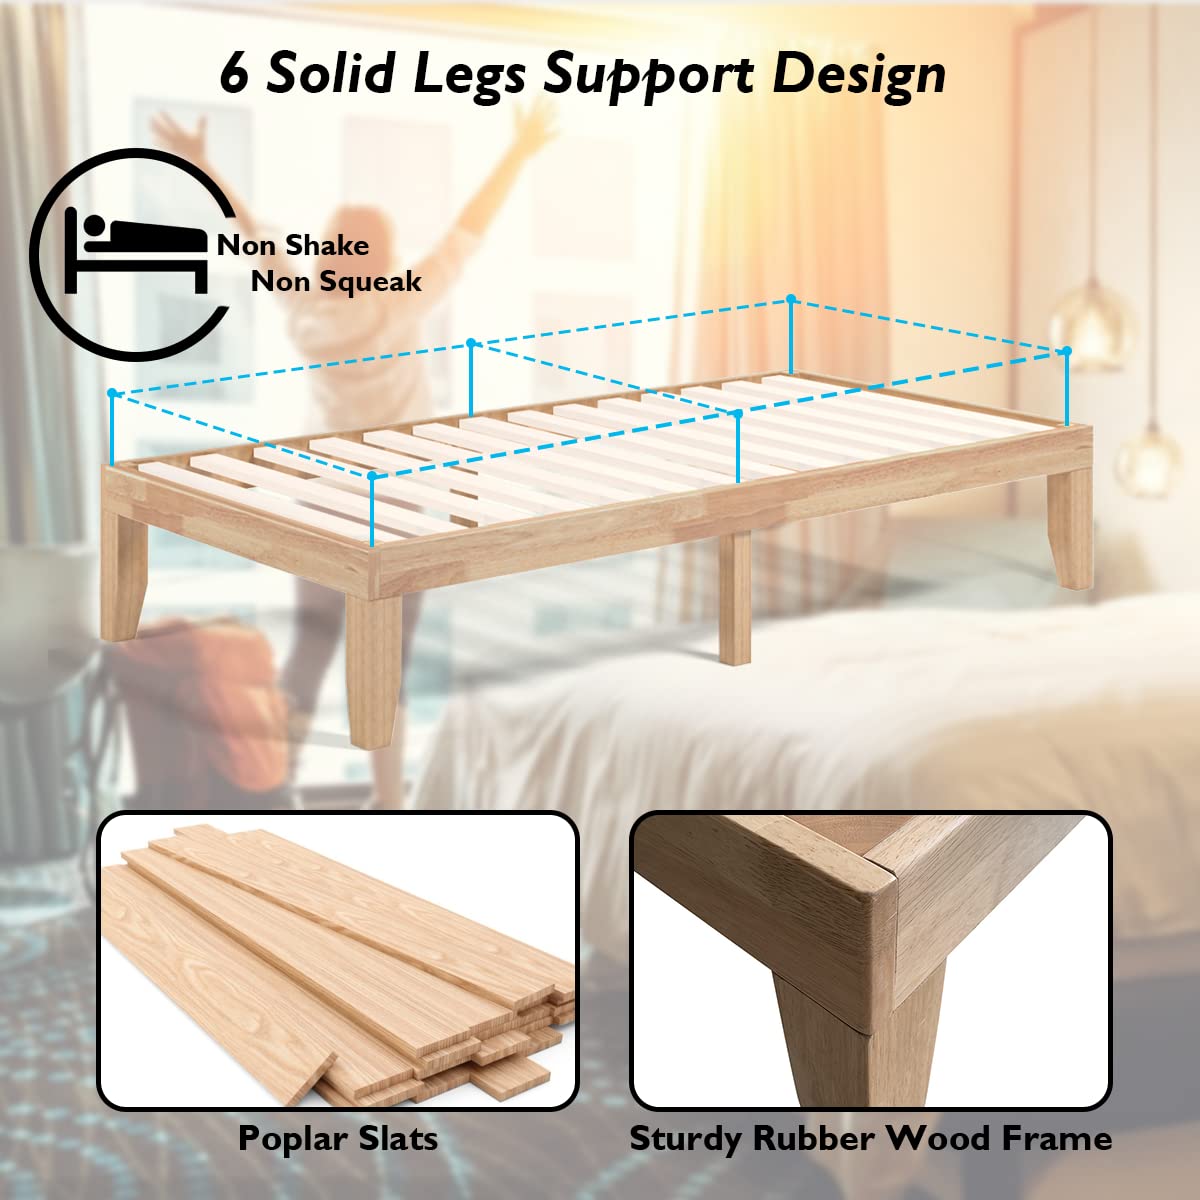 KOMFOTT 14 Inches Wood Platform Bed Frame Twin Size, Solid Wood Mattress Foundation with Rubber Wood Frame, Strong Poplar Wood Slat Support, No Box